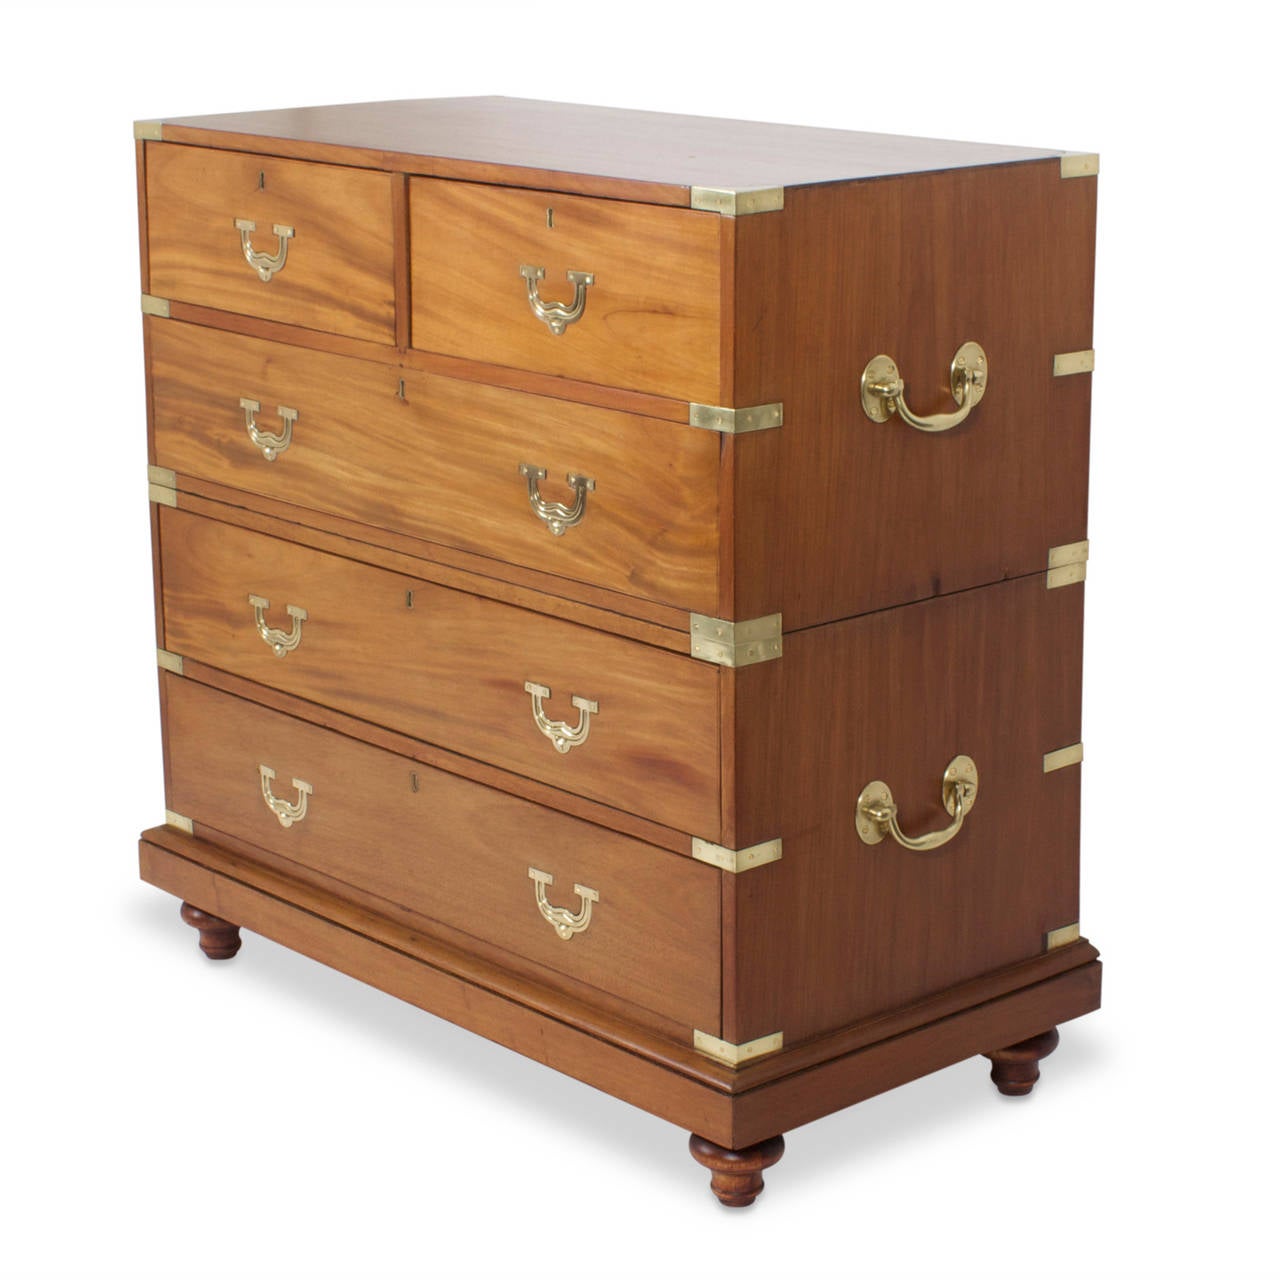 Rare camphor wood, antique chest of drawers with classic Campaign form, featuring brass hardware, dramatic wood grain, recessed pulls and raised on turned feet. Ready to be used for another hundred odd years. Newly polished.